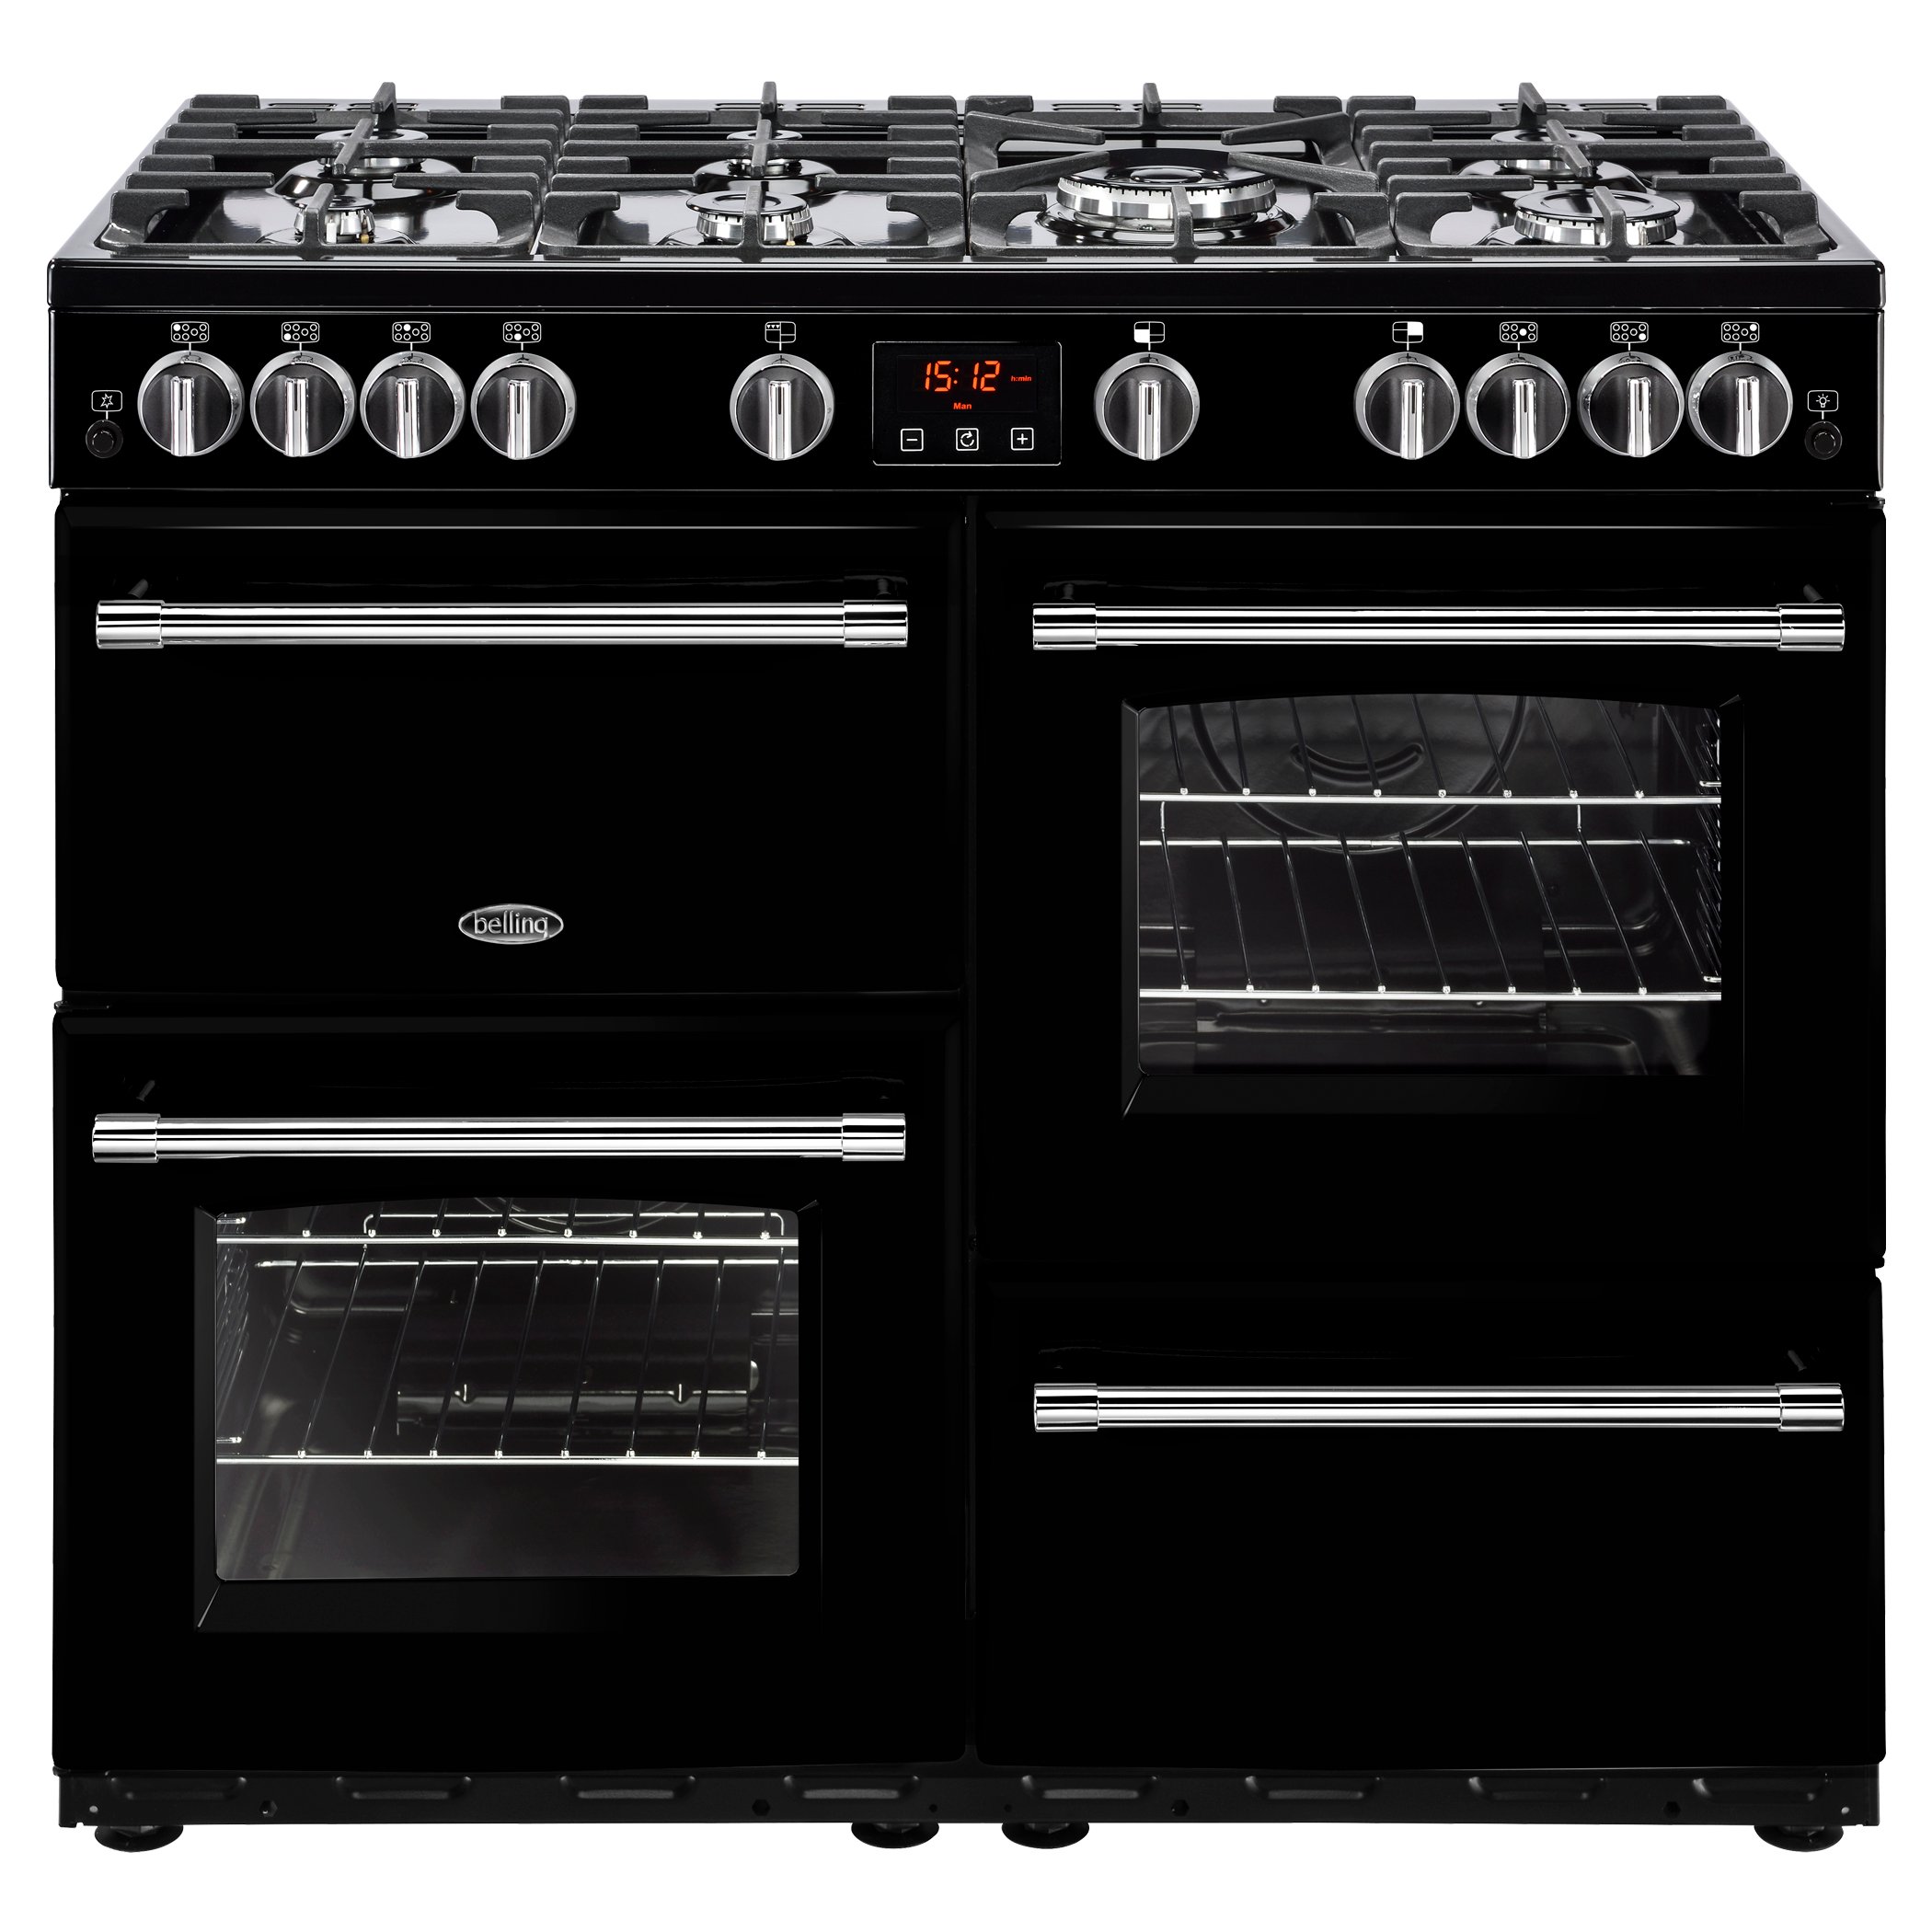 100cm gas range cooker with 7 burner gas hob with 4kW PowerWok™ burner, Maxi-Clock and easy clean enamel.